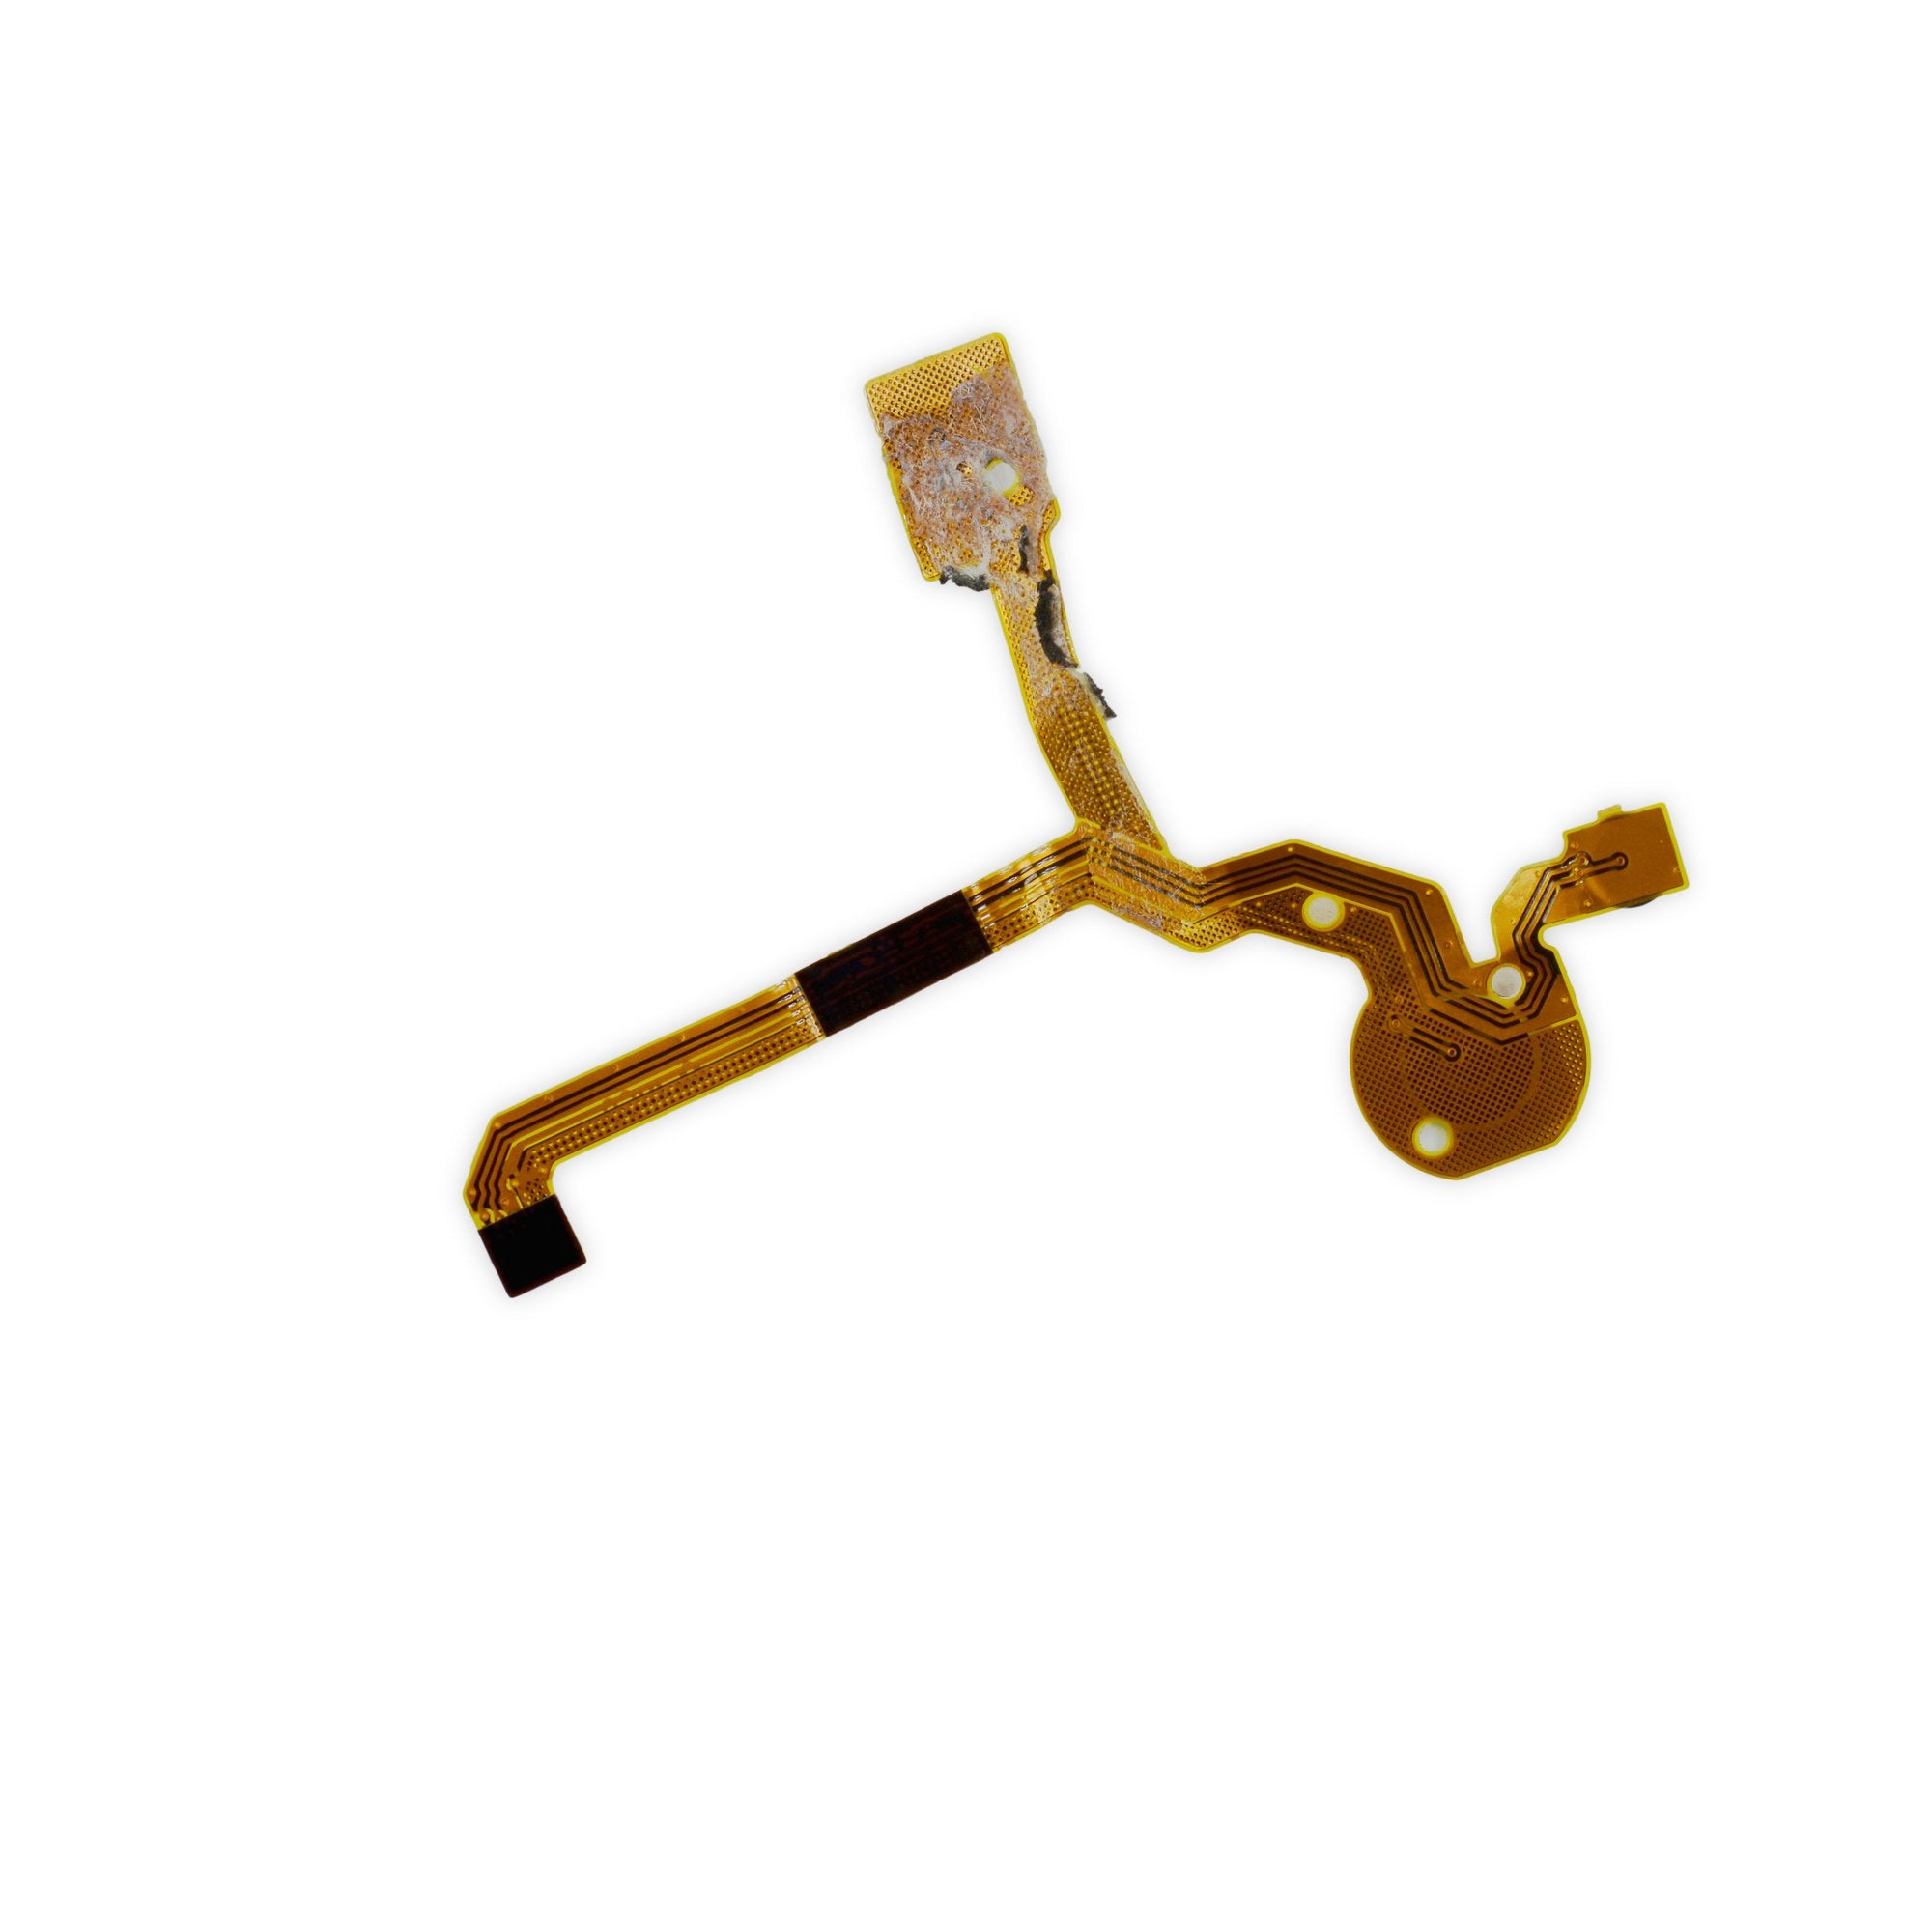 GoPro Hero3+ Silver Shutter/Select and Wi-Fi Button Flex Cable